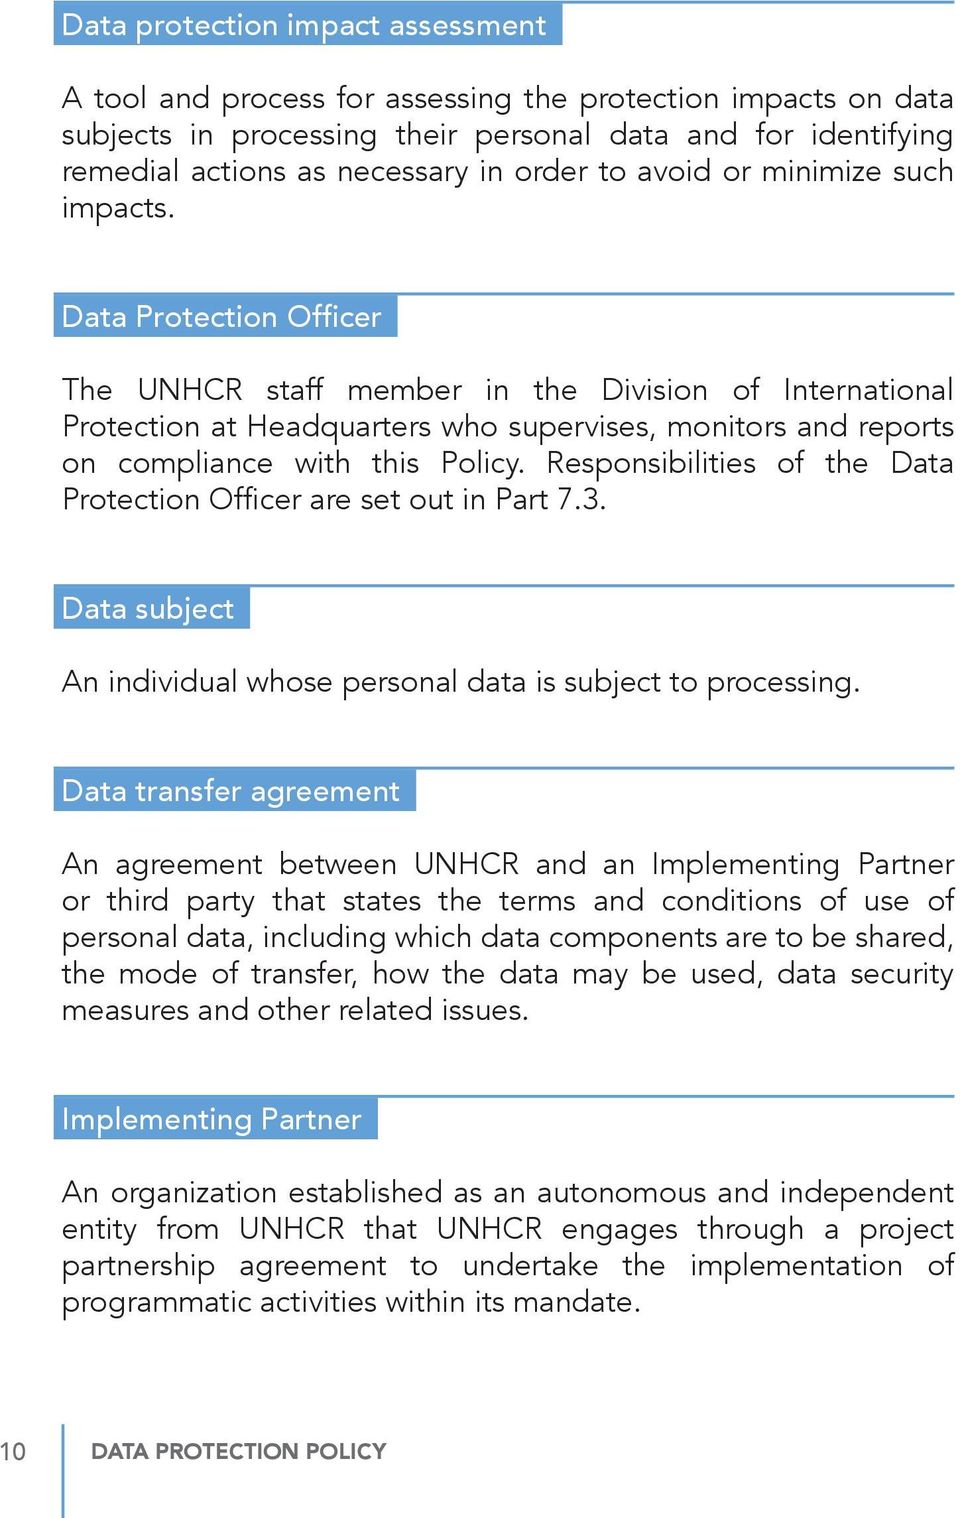 Data Protection Officer The UNHCR staff member in the Division of International Protection at Headquarters who supervises, monitors and reports on compliance with this Policy.